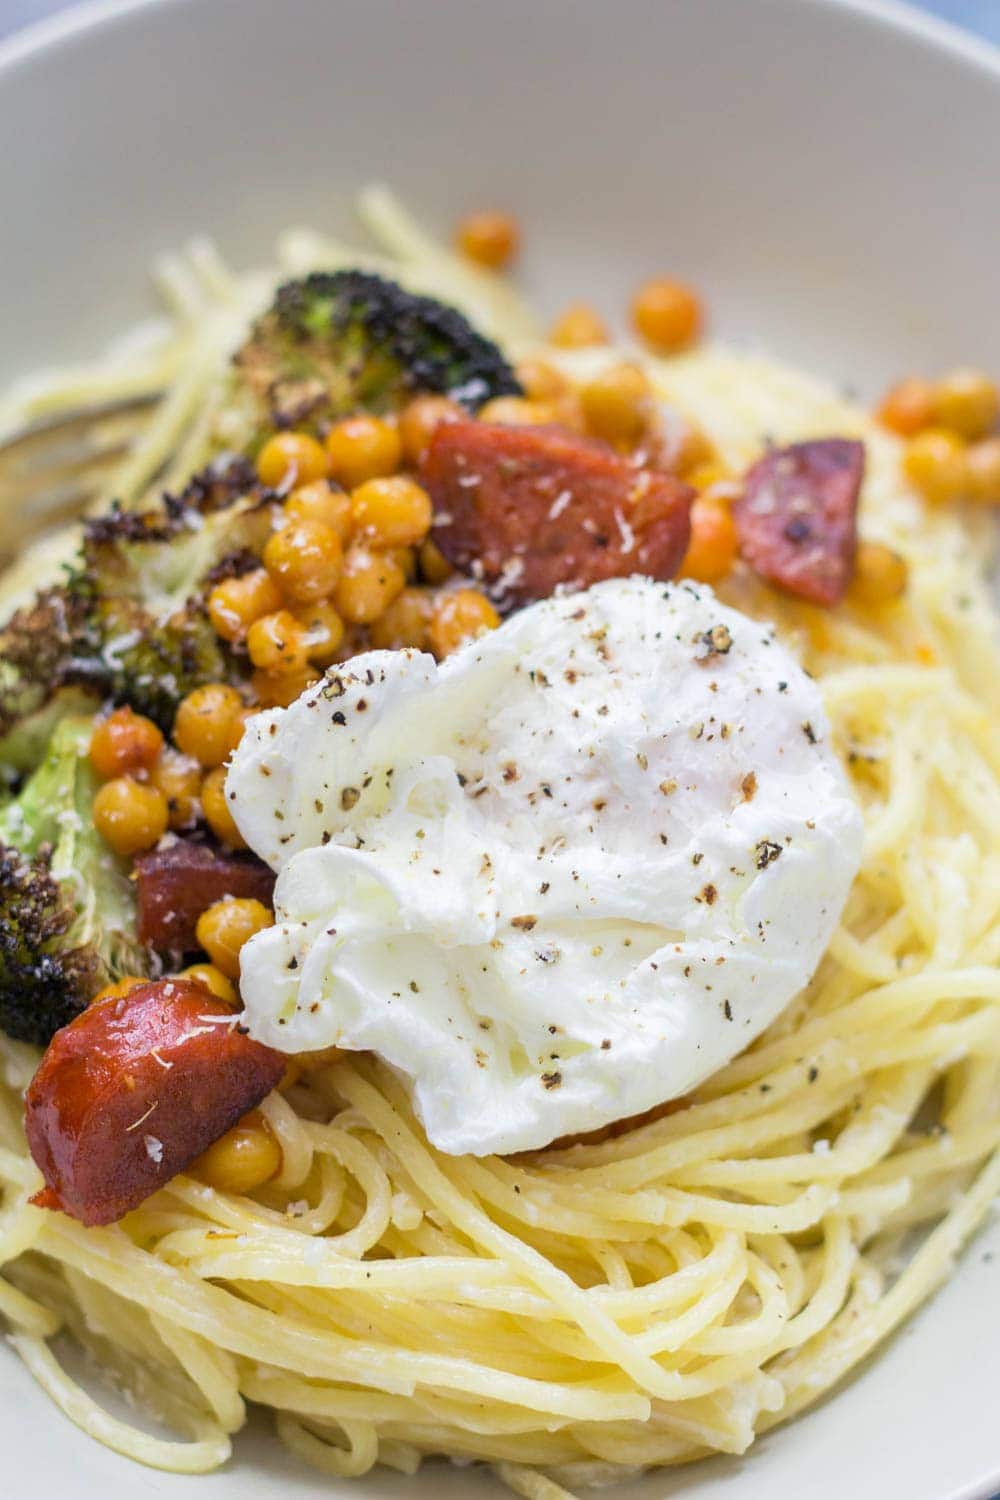 This garlic pasta is a simple weeknight meal packed with garlicky flavour and topped with delicious roasted broccoli, crispy chickpeas and chorizo. Finished with a poached egg.